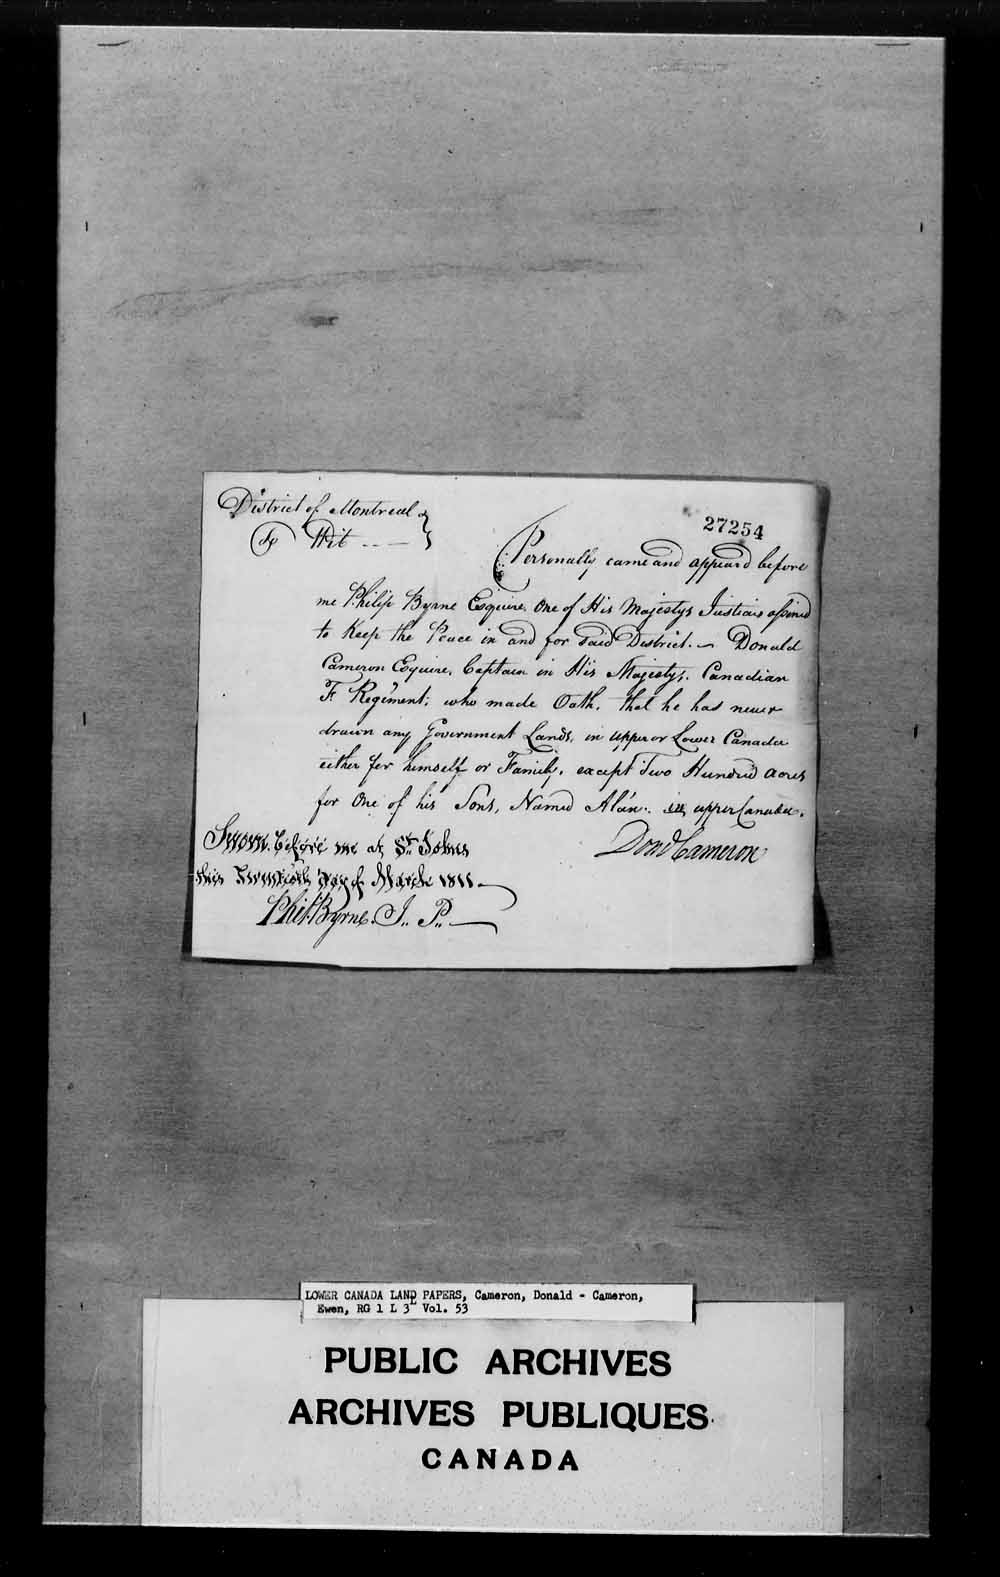 Digitized page of  for Image No.: e006611634